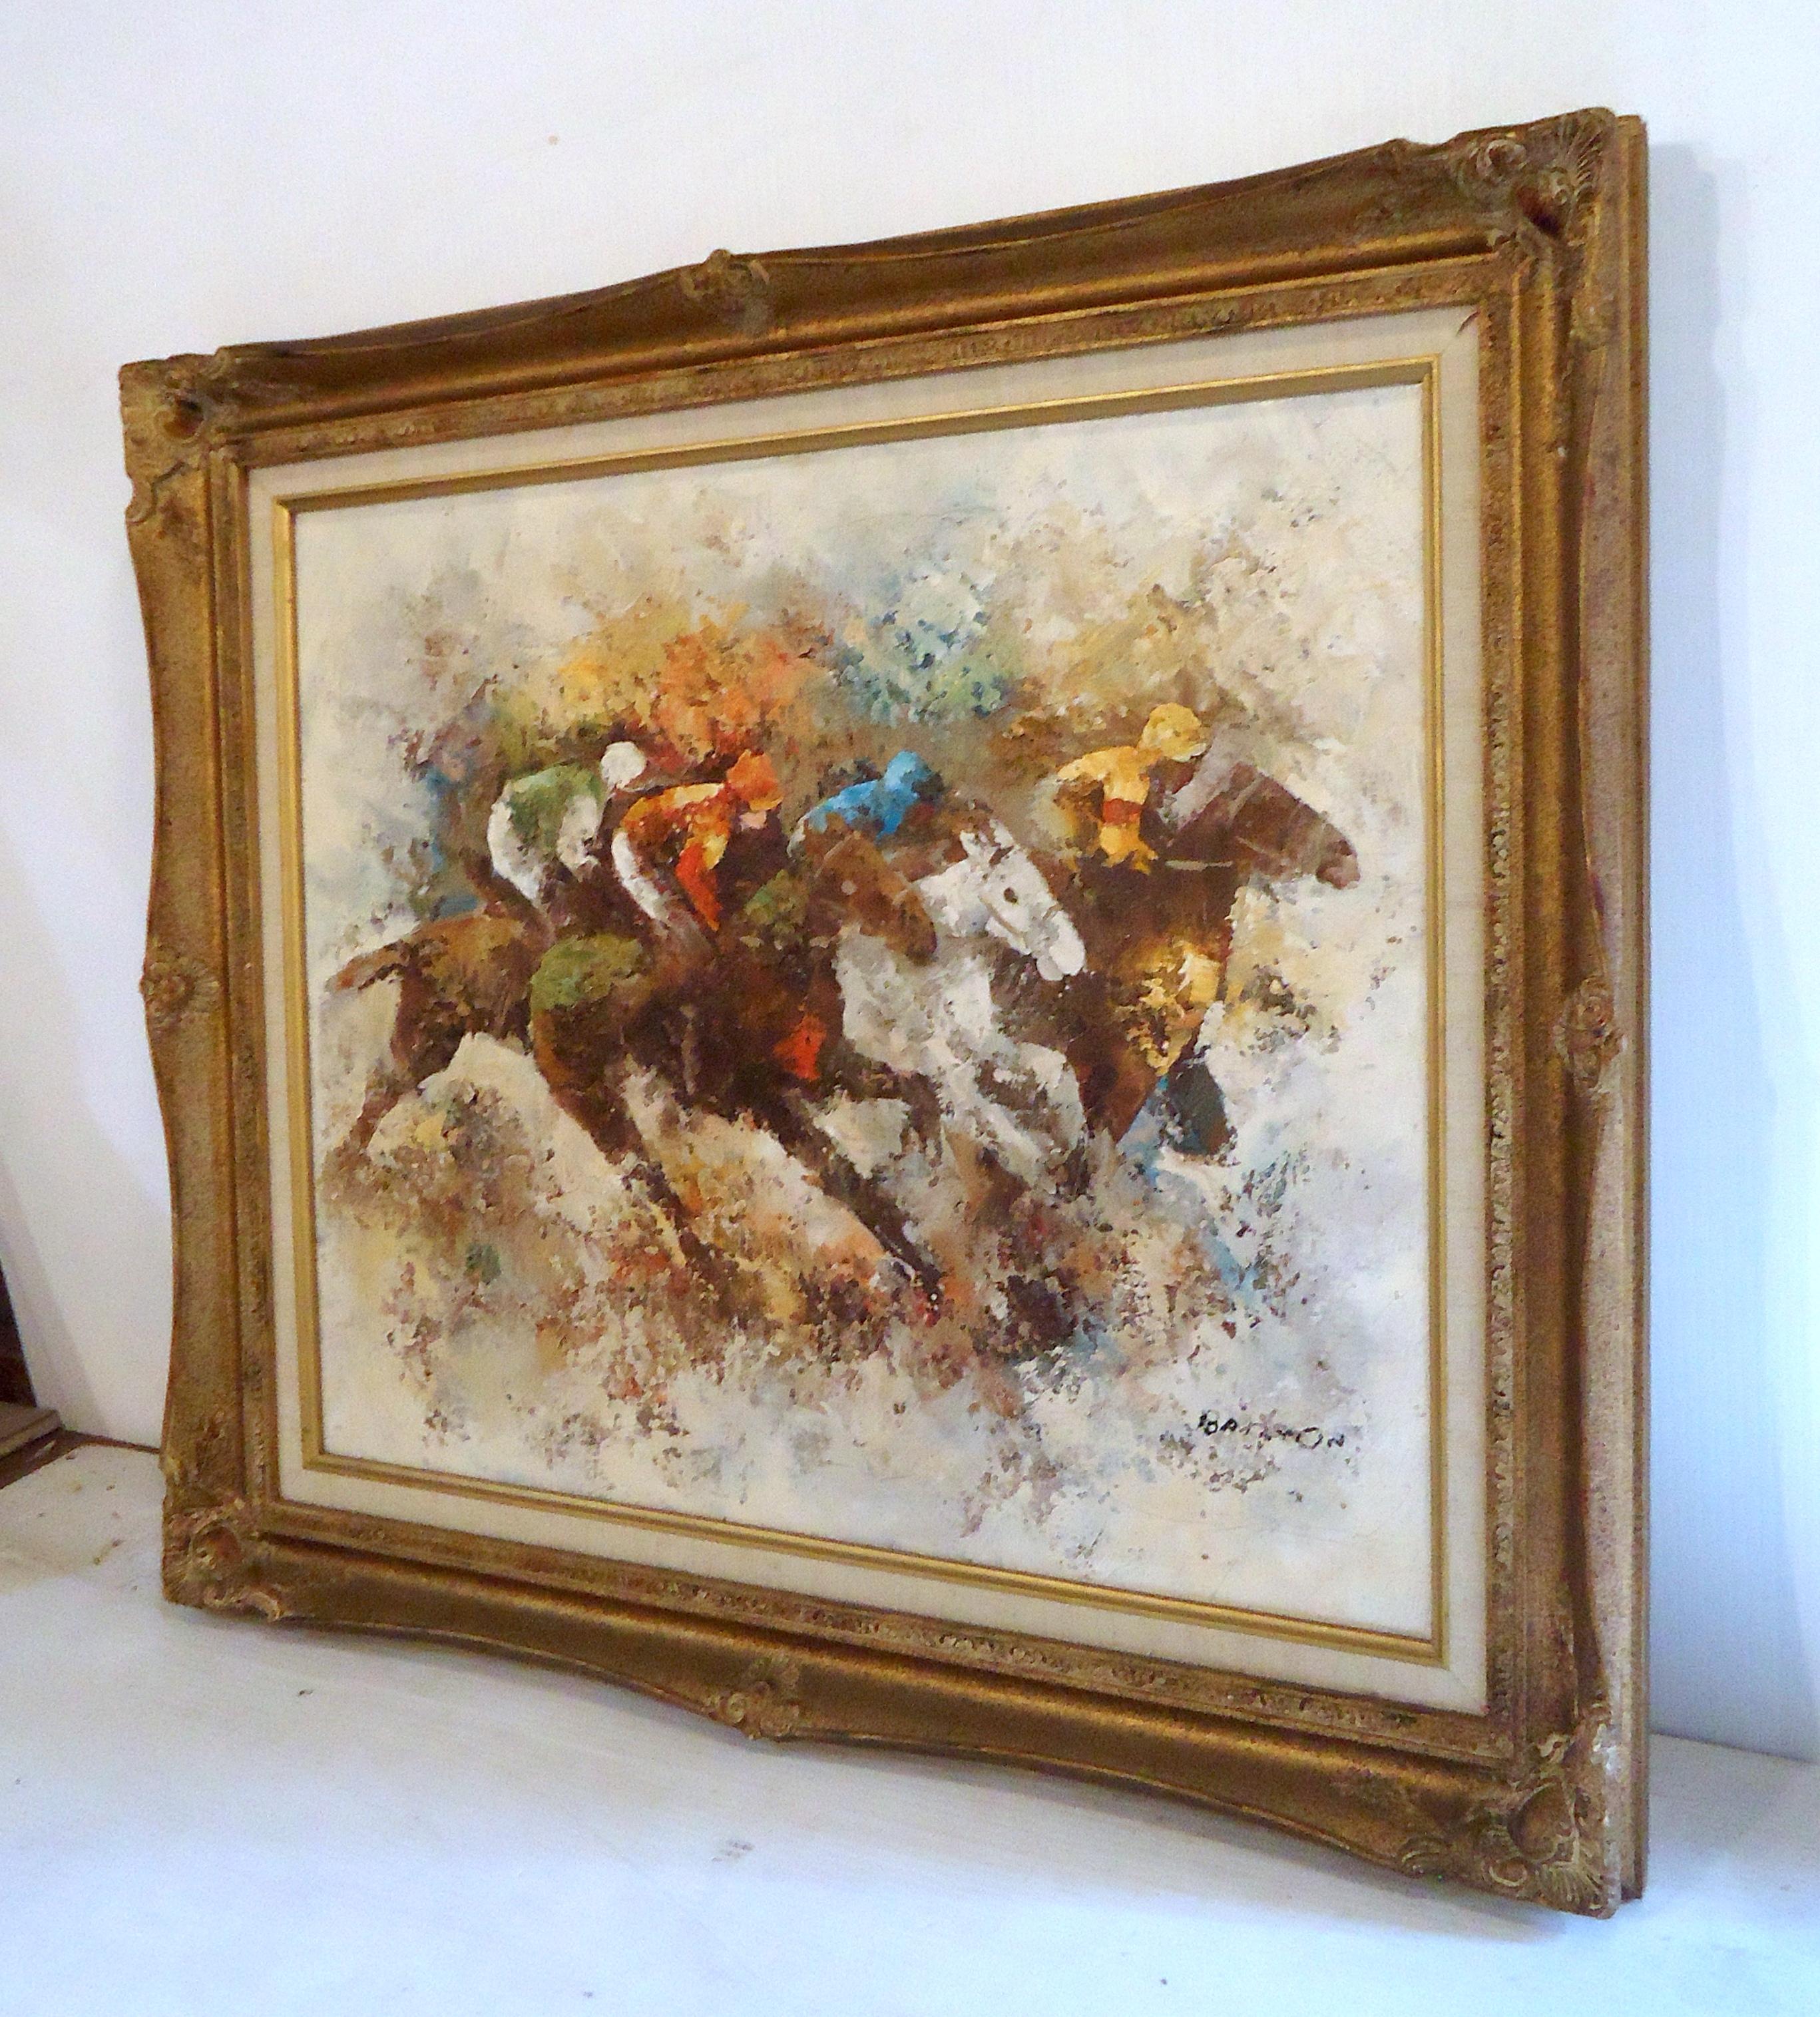 Mid-Century Modern framed oil painting of horses using vivid colors.
(Please confirm item location - NY or NJ - with dealer).